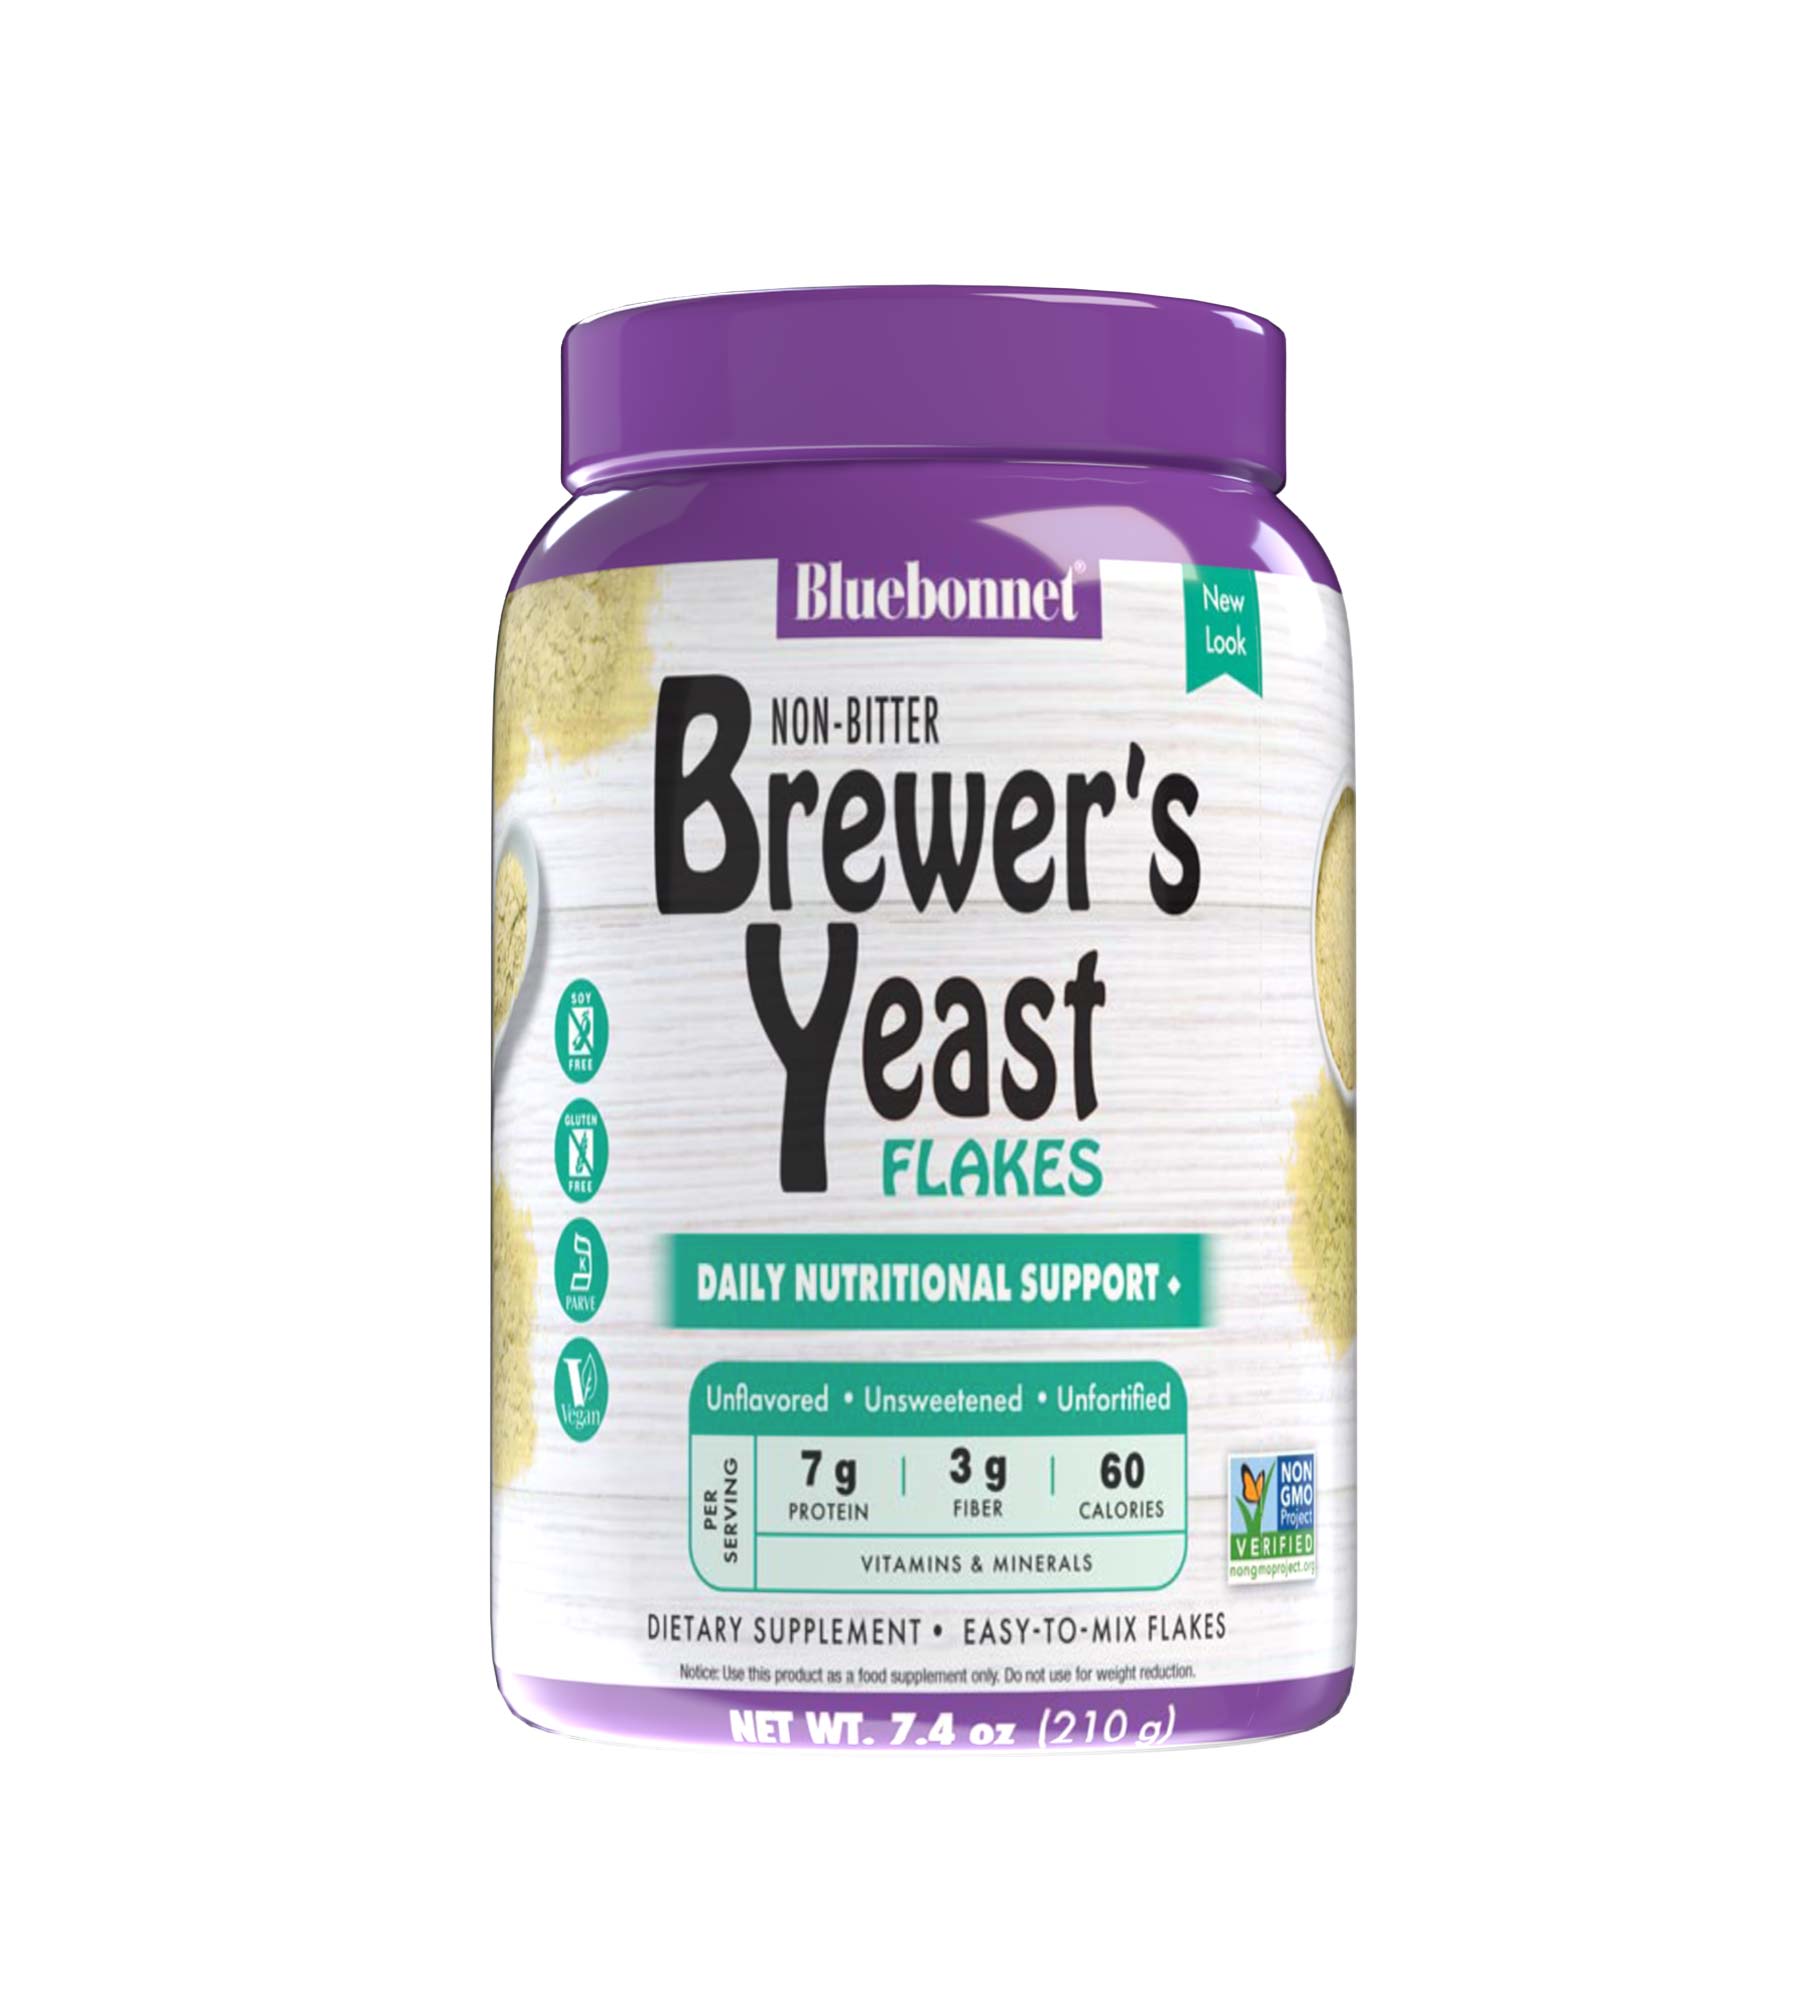 Bluebonnet’s Brewer's Yeast Flakes is formulated with a select strain of Saccharomyces cerevisiae that is grown on certified non-GMO sugar beet molasses instead of the typical grain-derived brewer’s yeast that is recovered from the beer-brewing process. Premium brewer’s yeast provides a toasted, non-bitter, savory flavor without any artificial sweeteners, colors, or flavors and can be incorporated into any recipe to improve texture and nutritional value. #size_7.4 oz